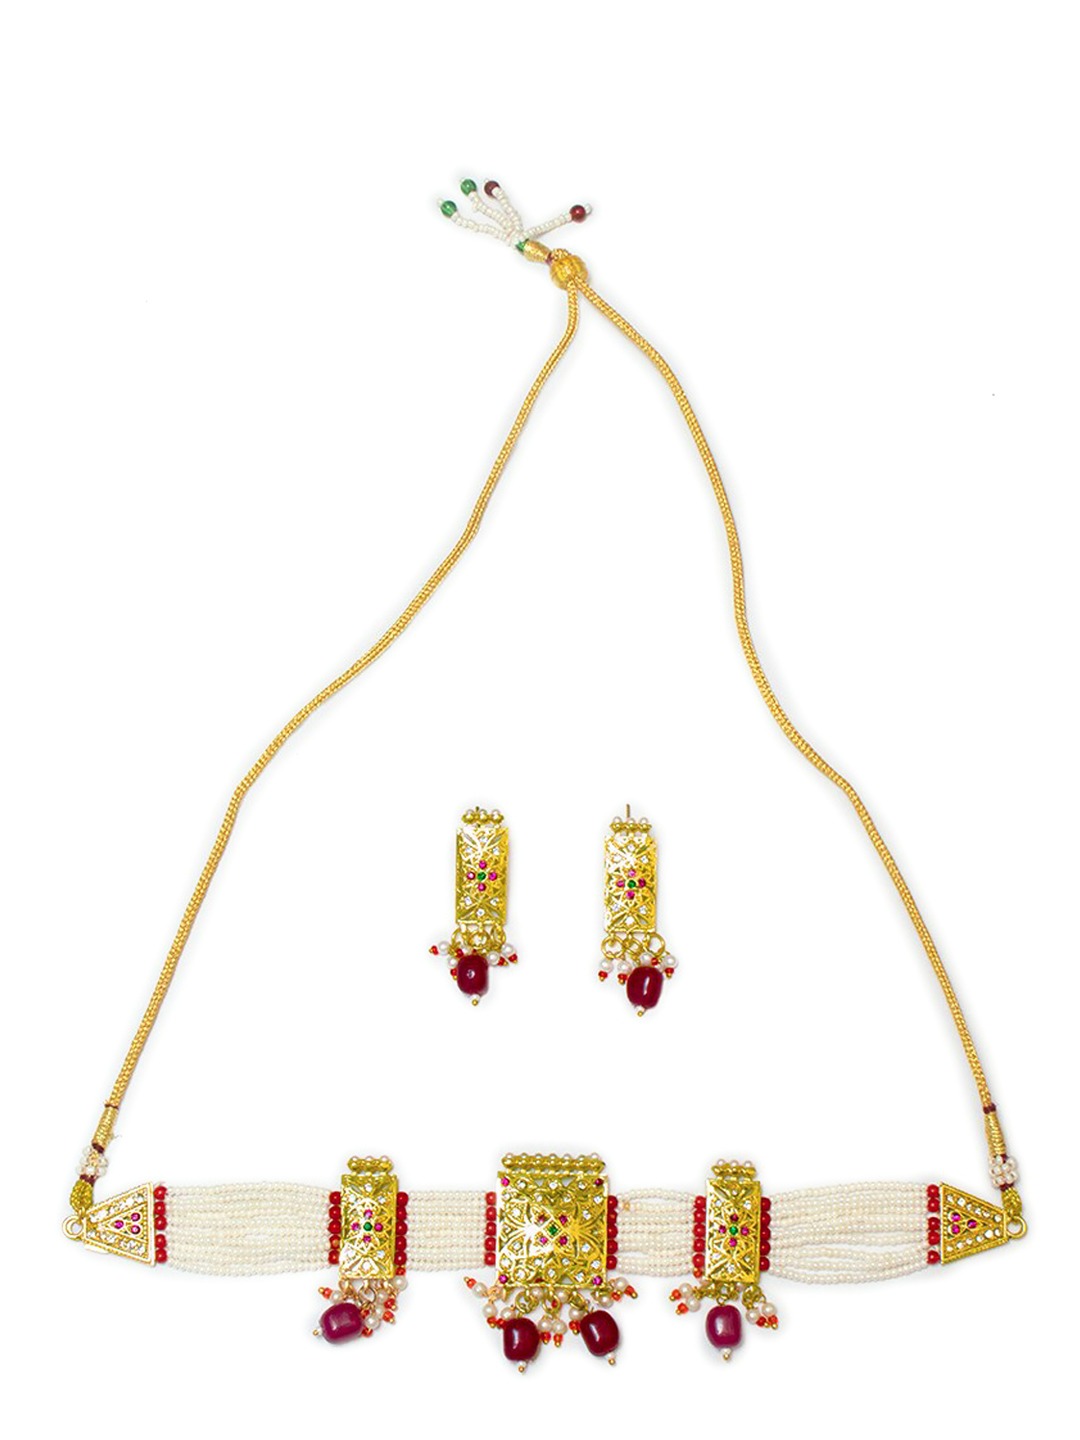 Women's Gold-Plated Pink & White Stone-Studded & Beaded Jewellery Set - Morkanth